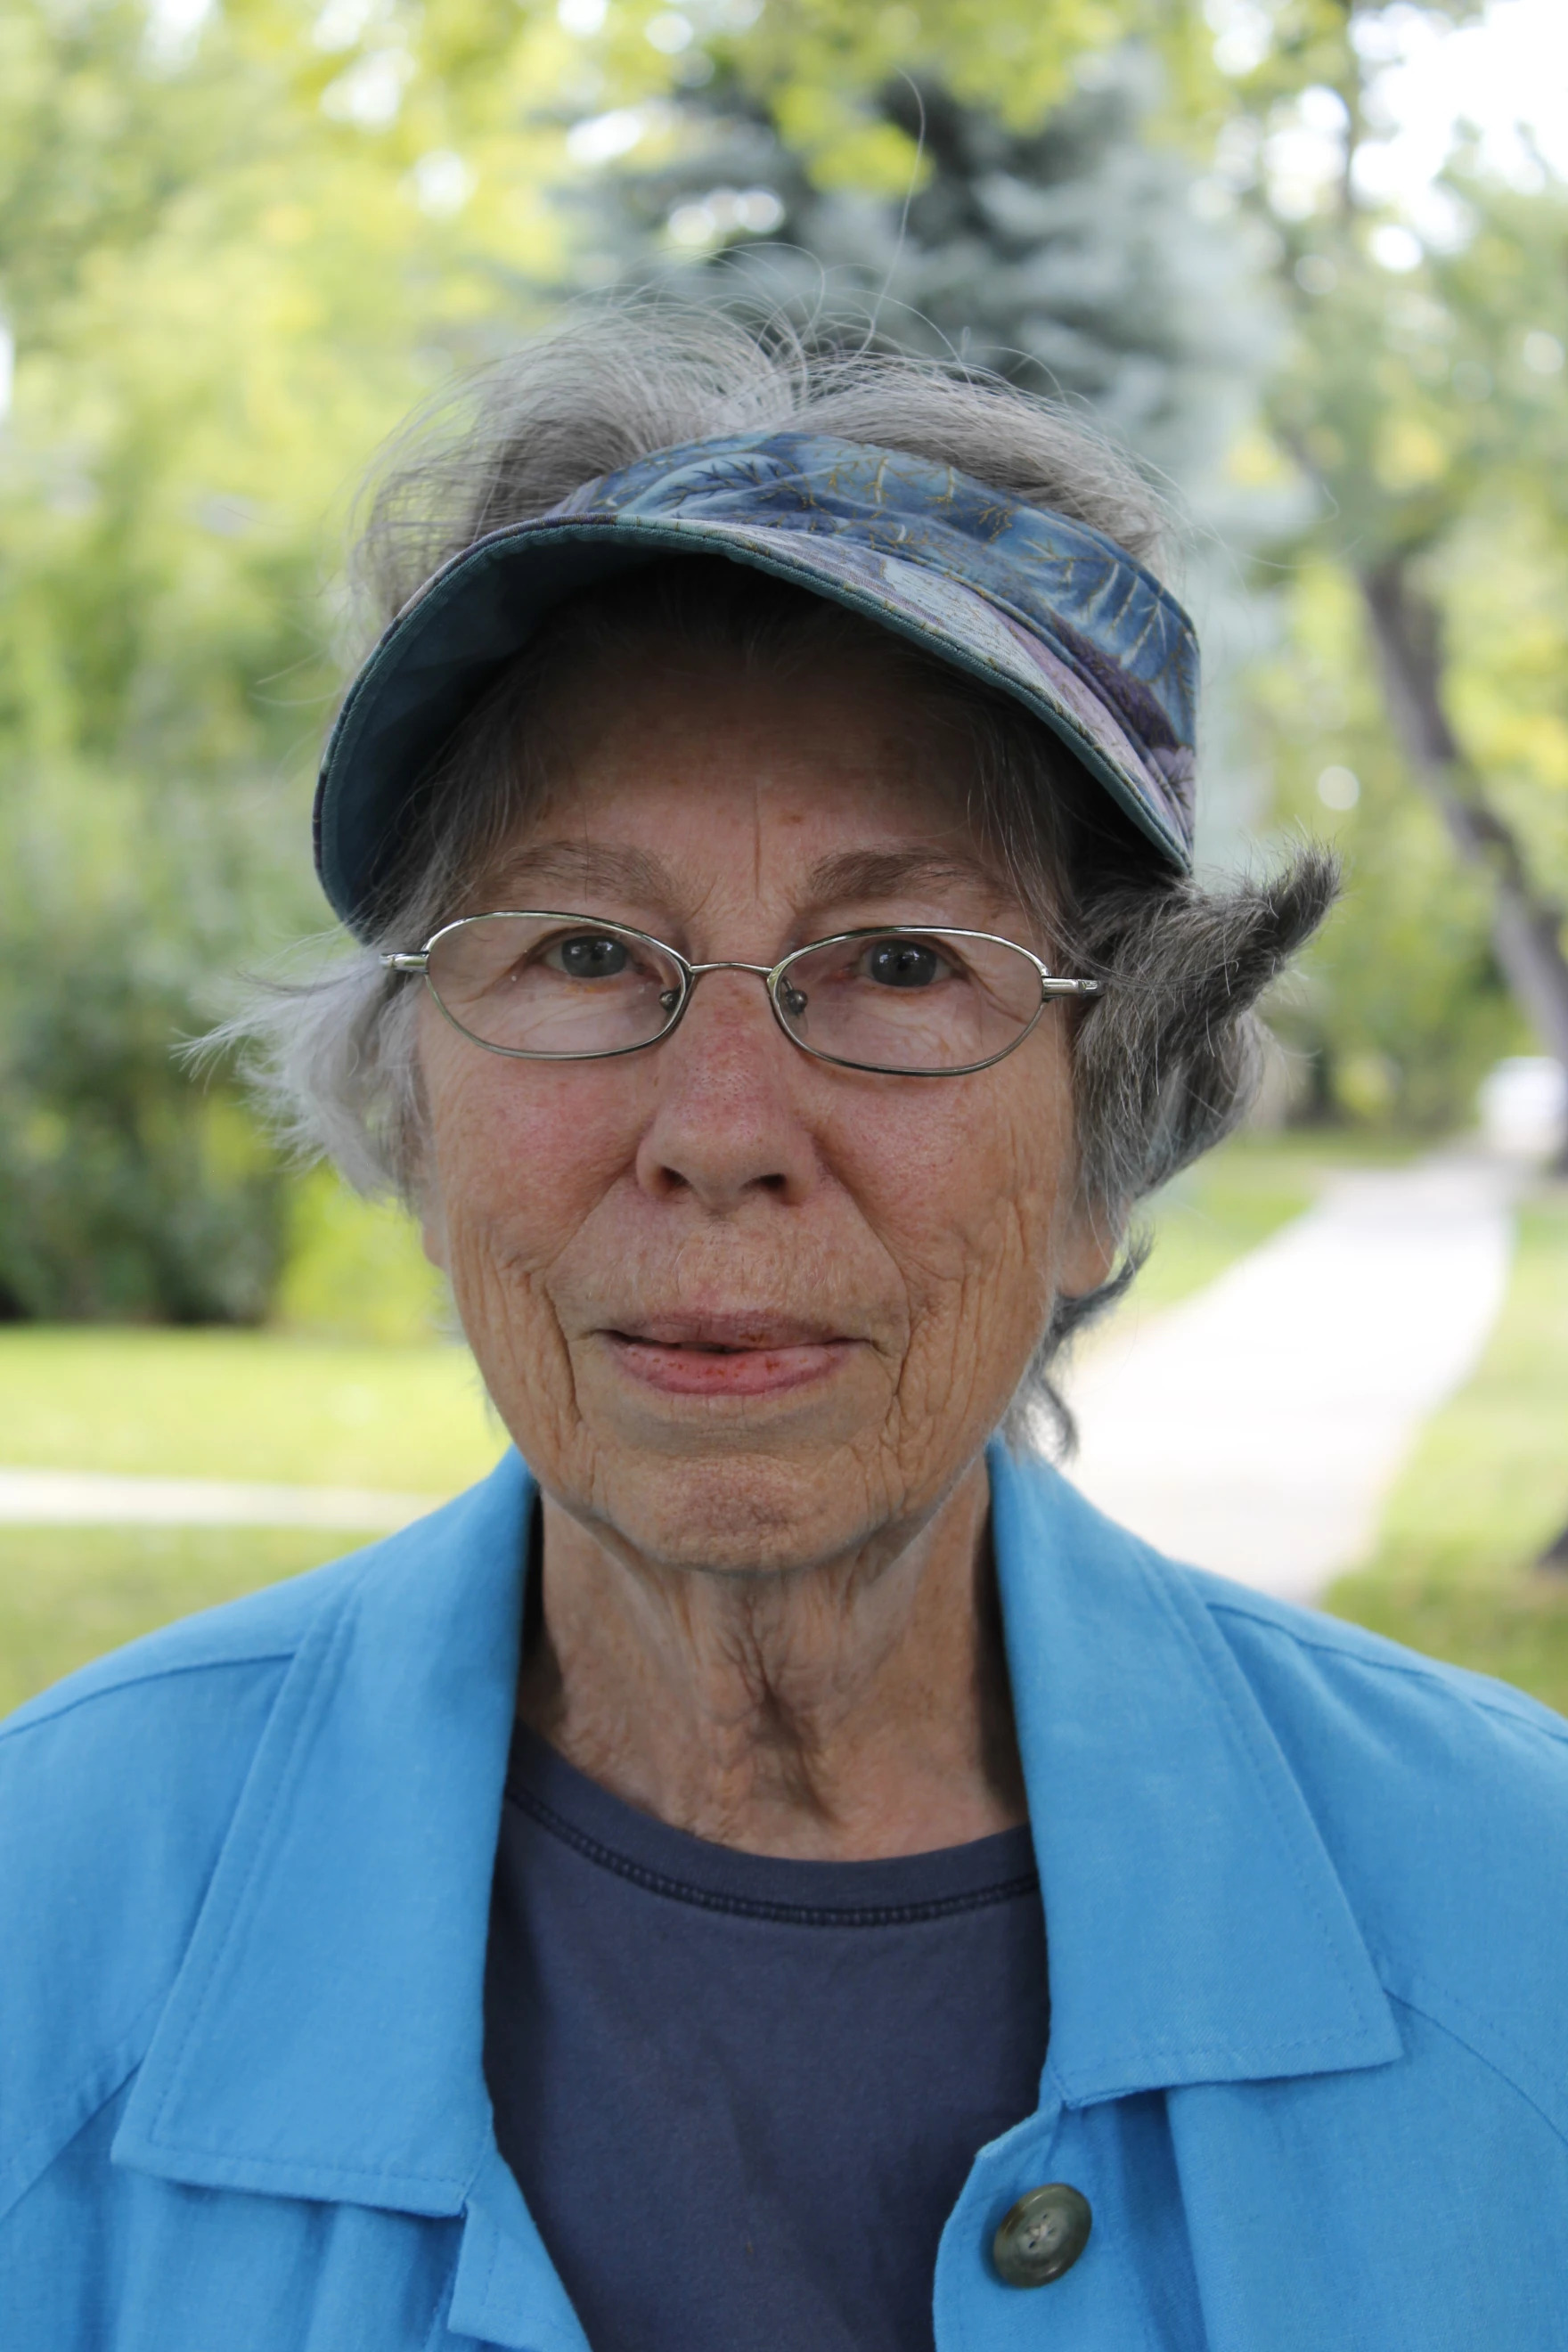 an older white woman, wearing glasses, a hat, a light blue jacket, and a darker blue shirt looks penisvely at the camera outside, with trees behind her